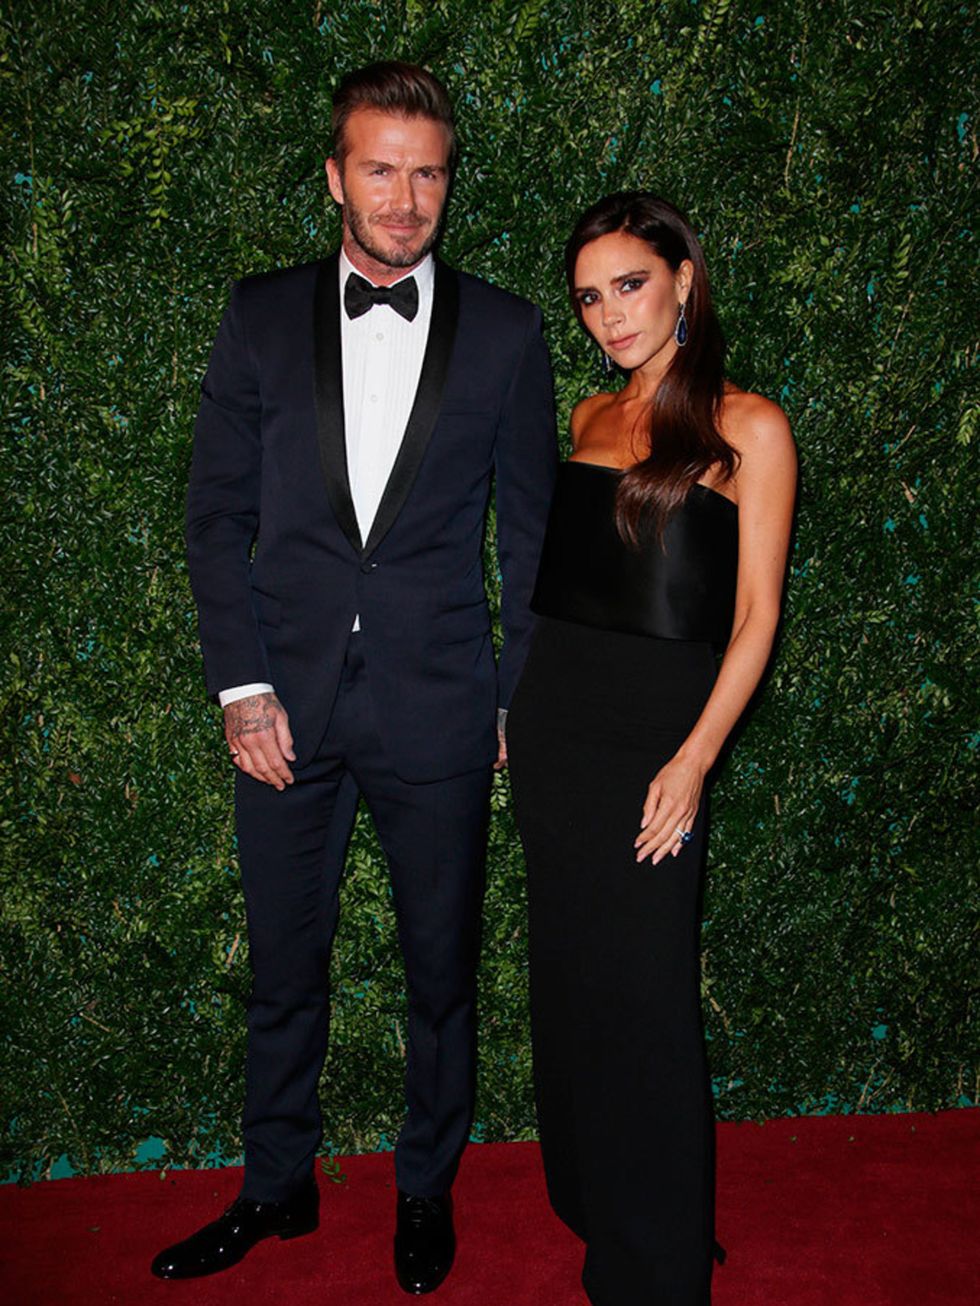 David Beckham and Victoria Beckham wearing a gown from her collection to the Evening Standard Theatre Awards in London, November 2014.